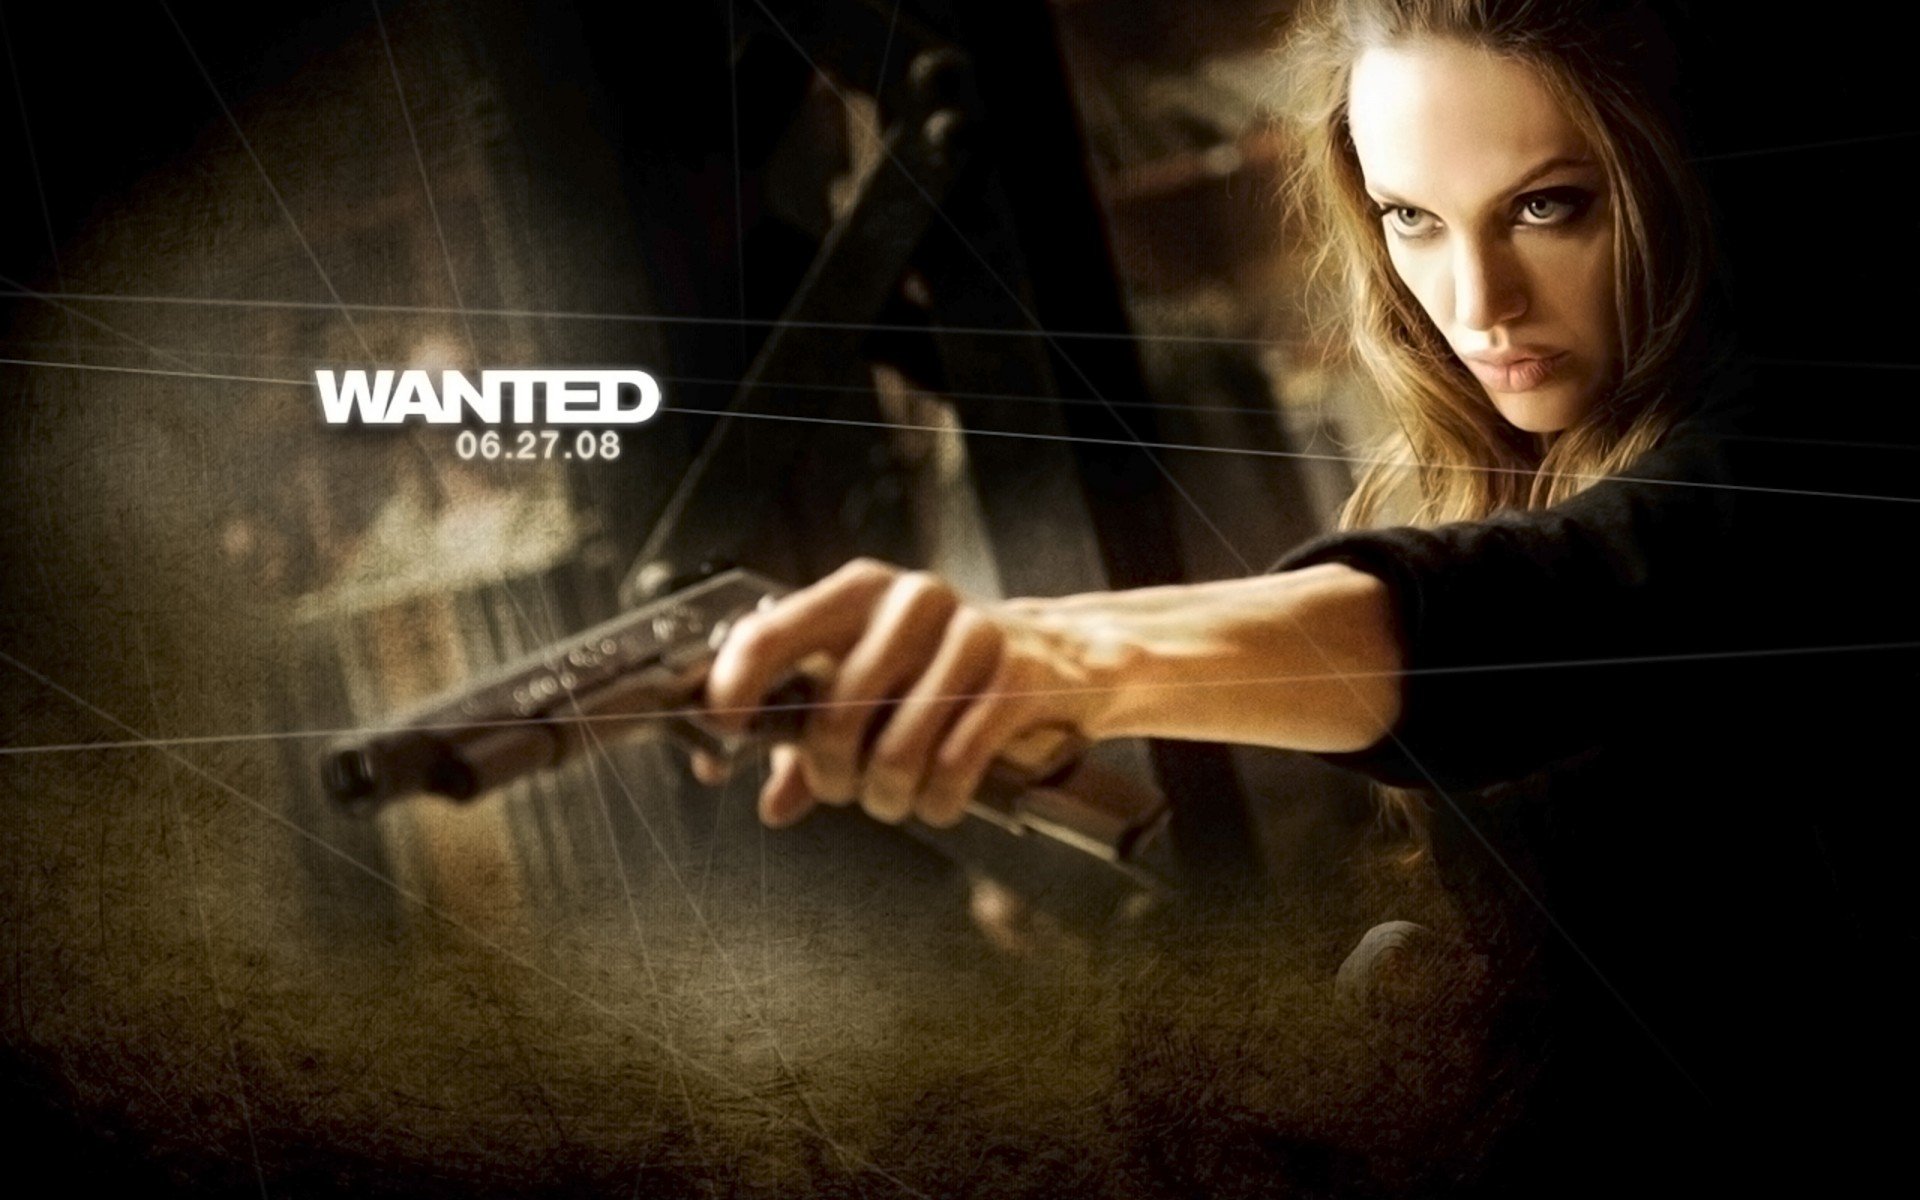 wanted, Action, Crime, Fantasy, Sci fi, Jolie,  70 Wallpaper